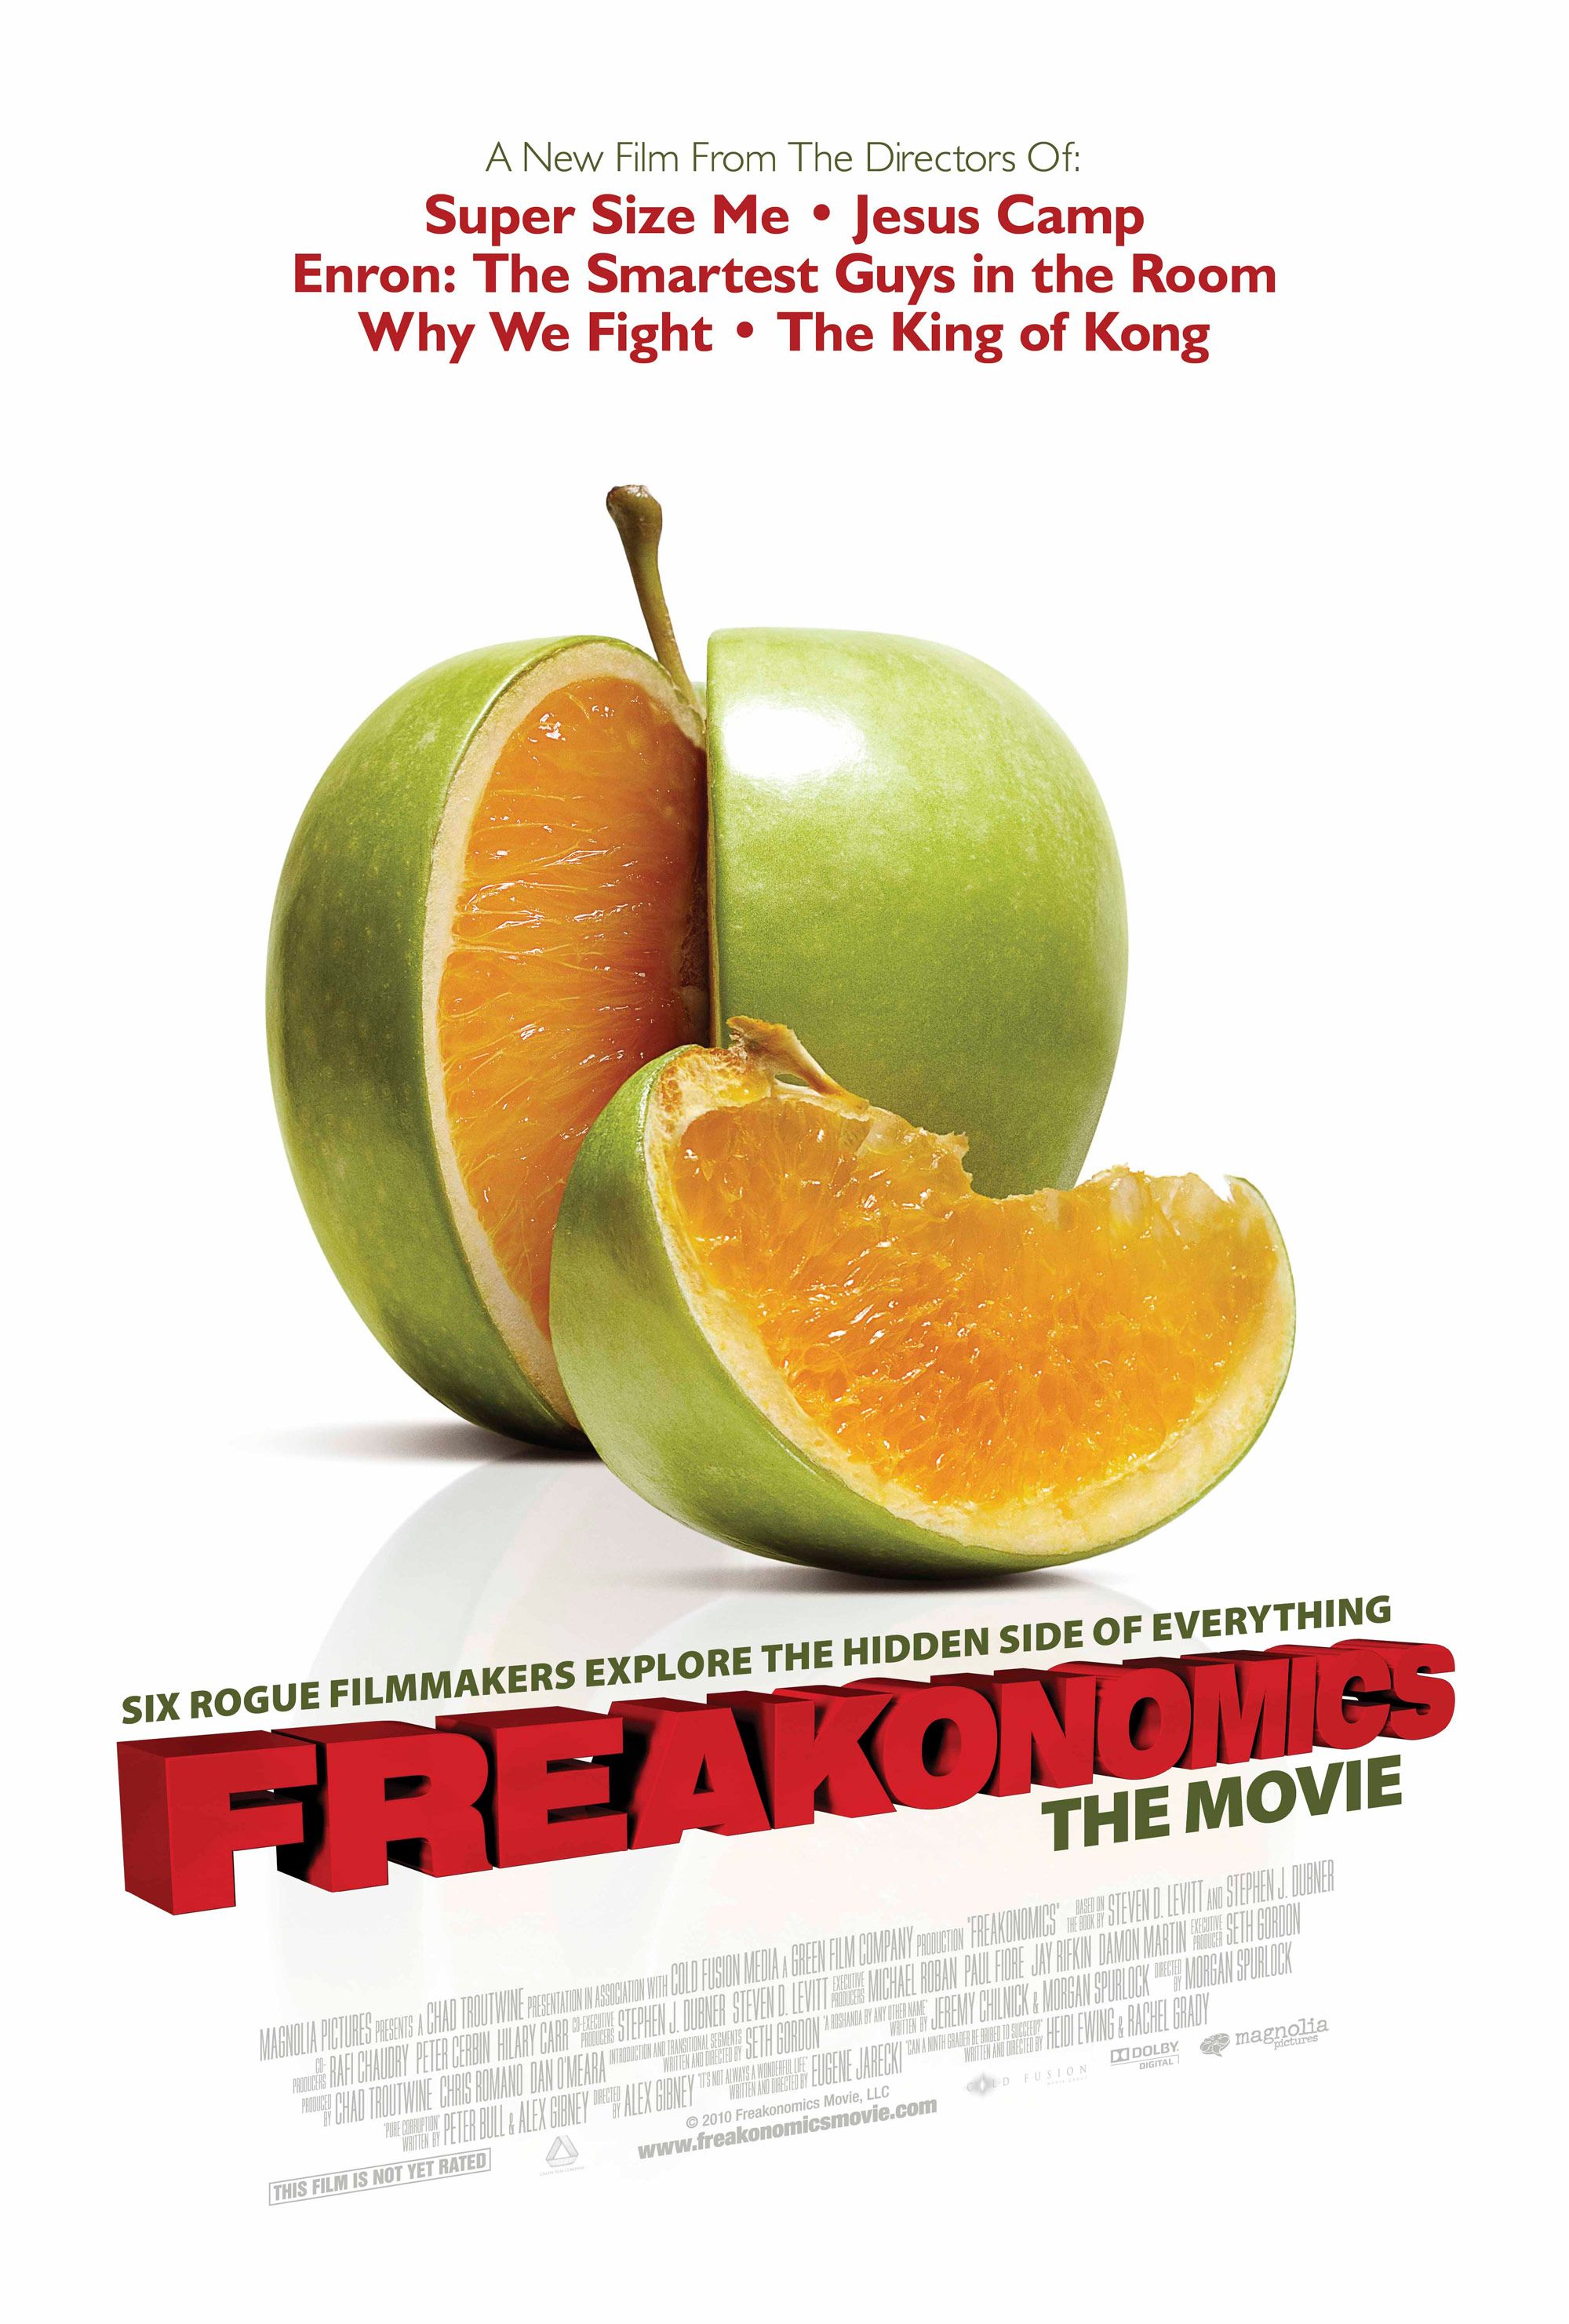 Magnolia Pictures lets viewers pay what they want for a Freakonomics advance screeningMagnolia Pictures and the Green Film Company announced today a unique screening program in ten cities across the country that will allow filmgoers to choose how much they want to pay for an advance look at {0}: The Movie. The highly anticipated film version of the internationally bestselling book by Stephen Dubner and Steven Levitt hits theaters nationwide on October 1st. These pay-what-you-want screenings offe